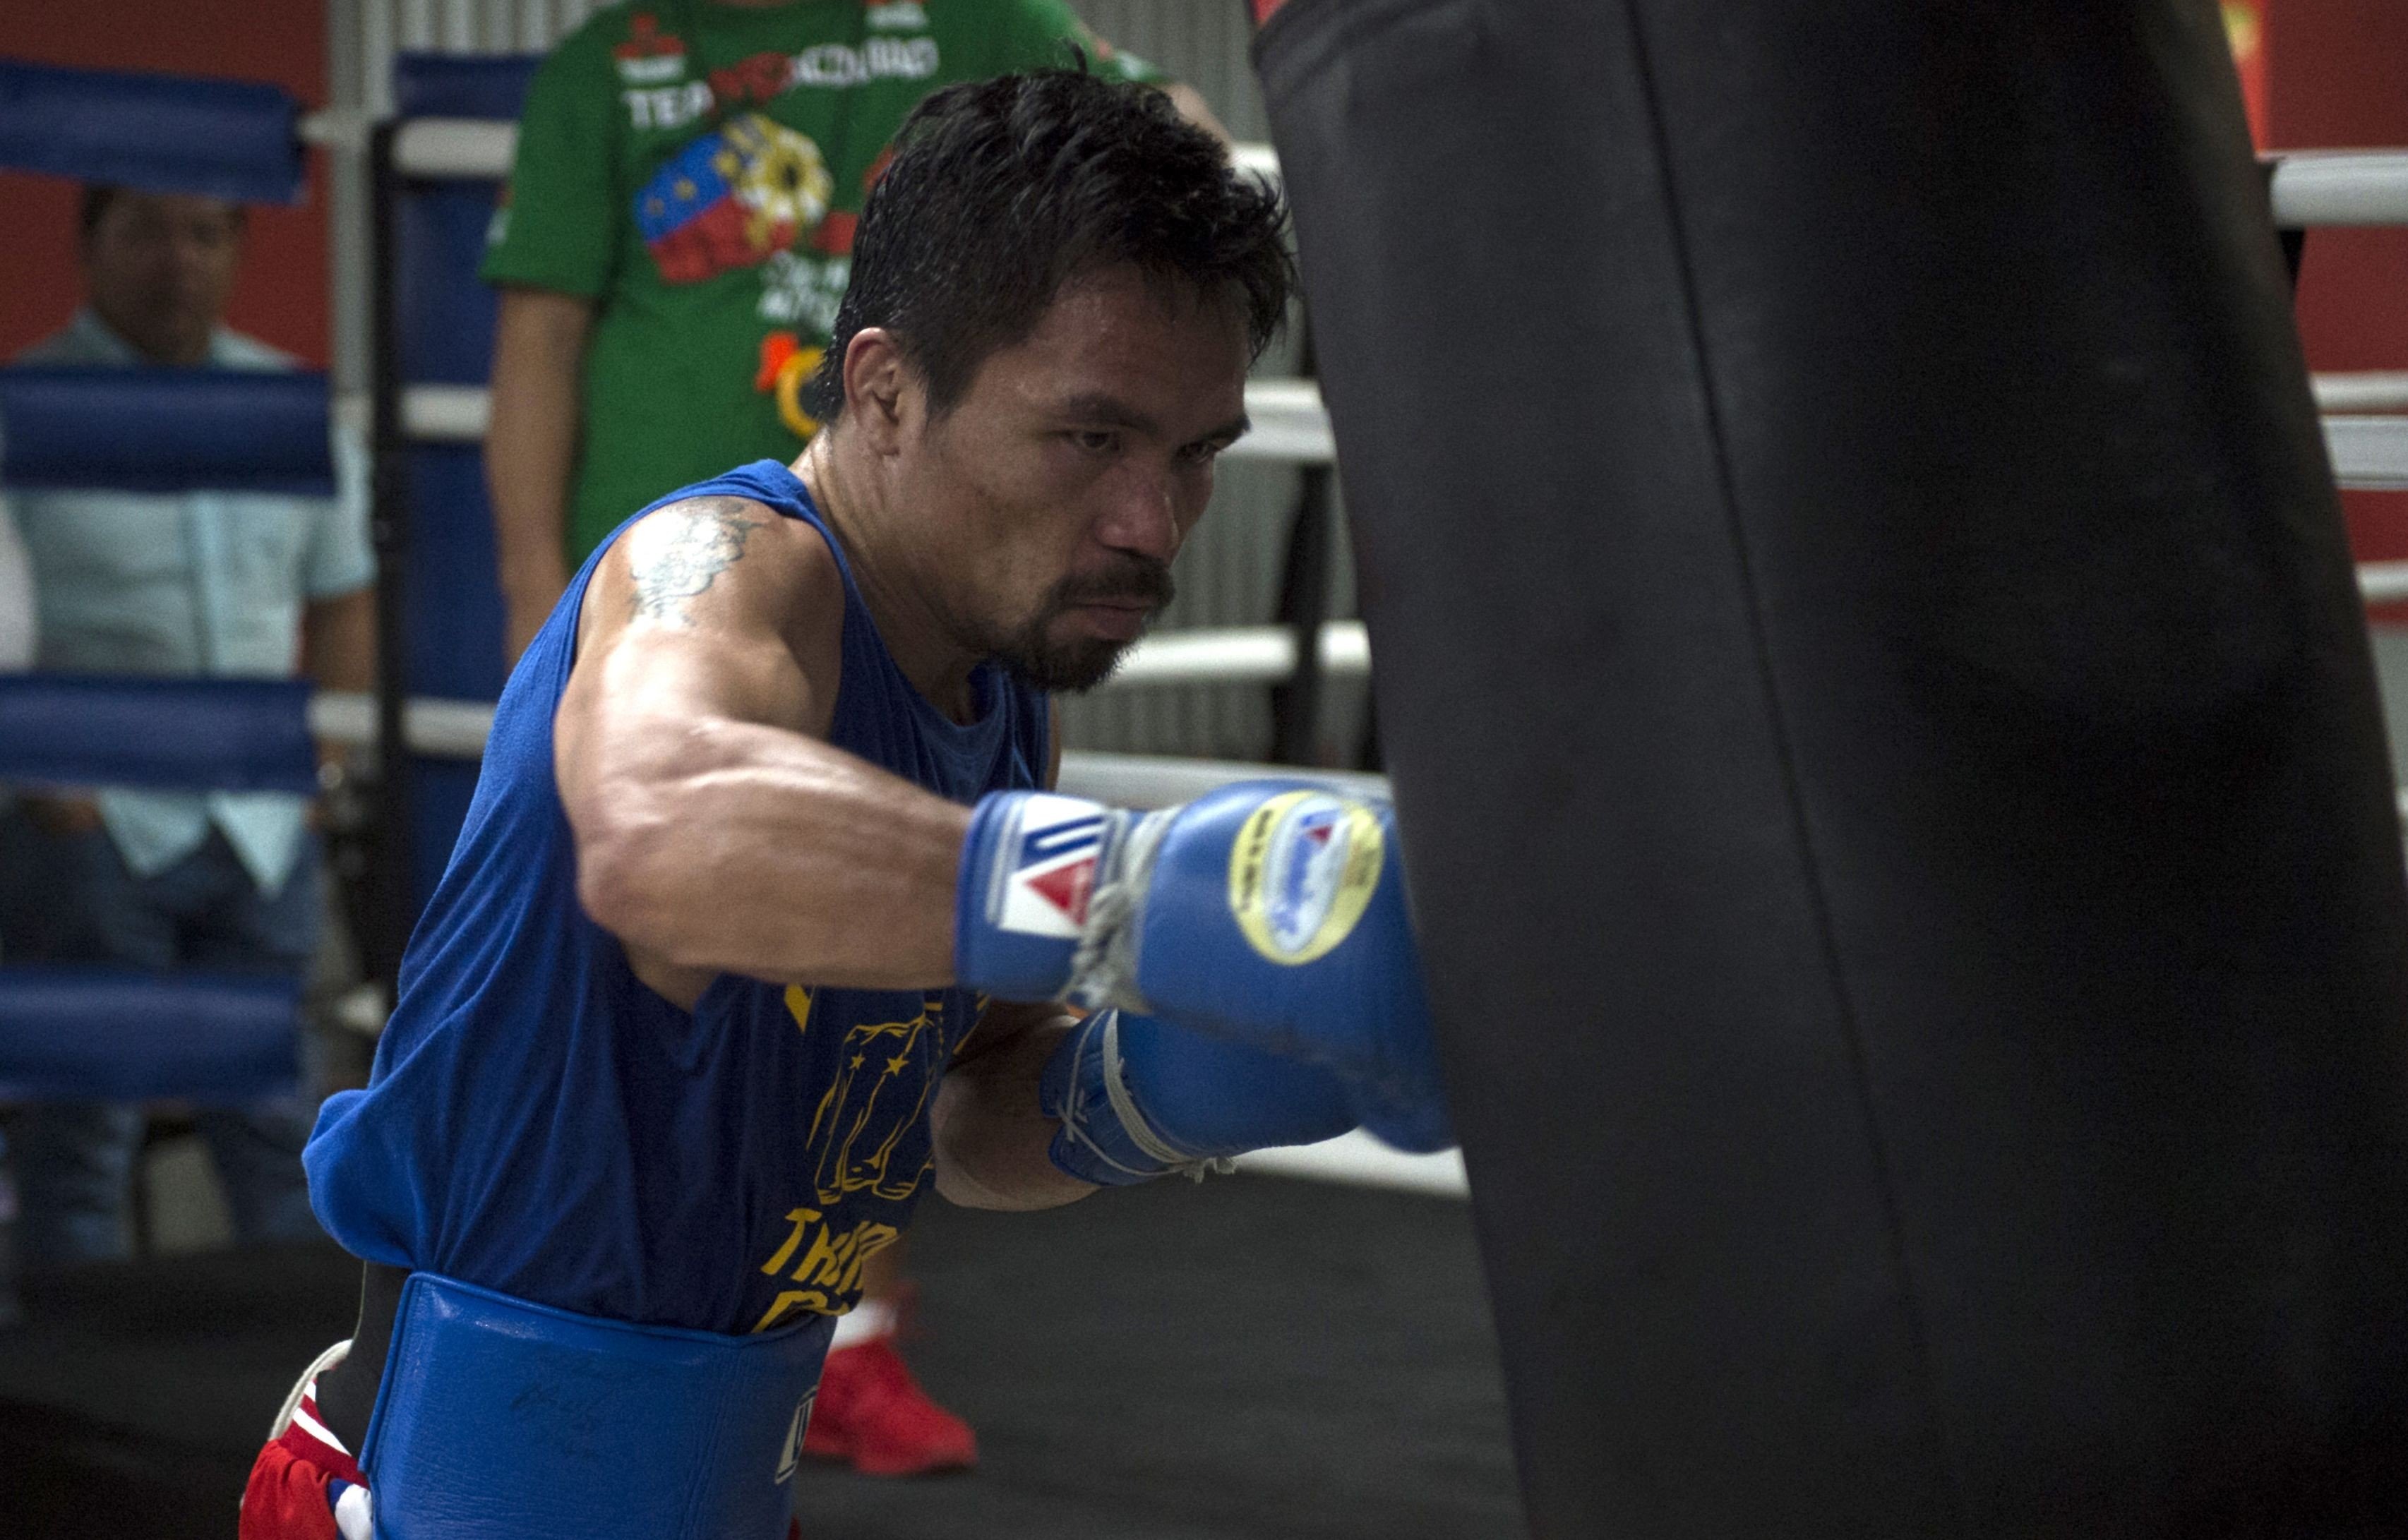 Philippine boxer Manny Pacquiao training at a gym in Manila. The boxer and senator is opening an academy in Beijing. Photo: AFP